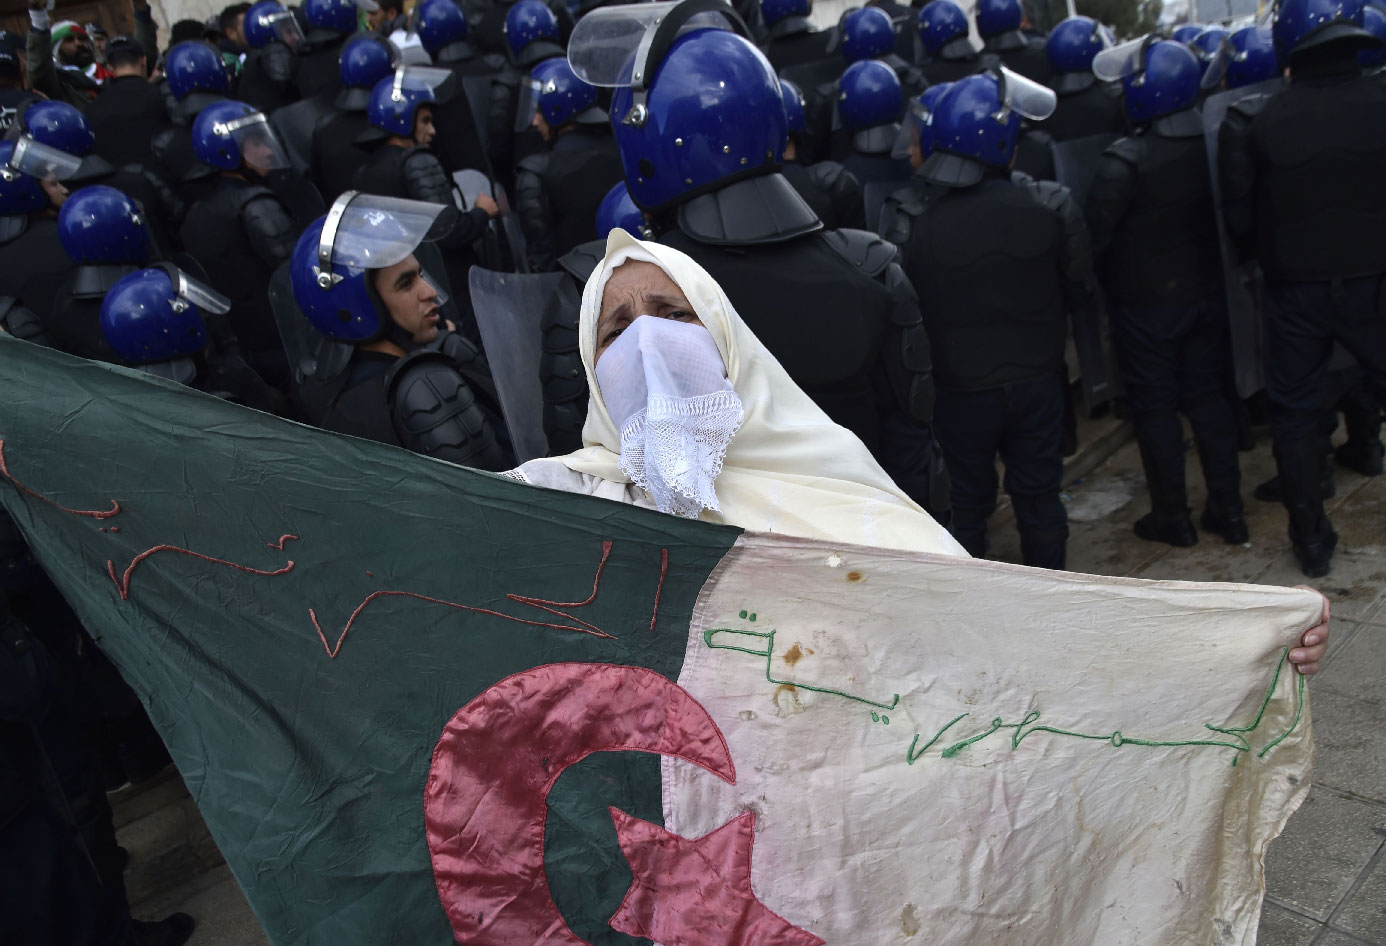 An Algerian woman holds a flag near security forces cordoning-off a protest area during an anti-system demonstration in the capital Algiers on April 10, 2019.